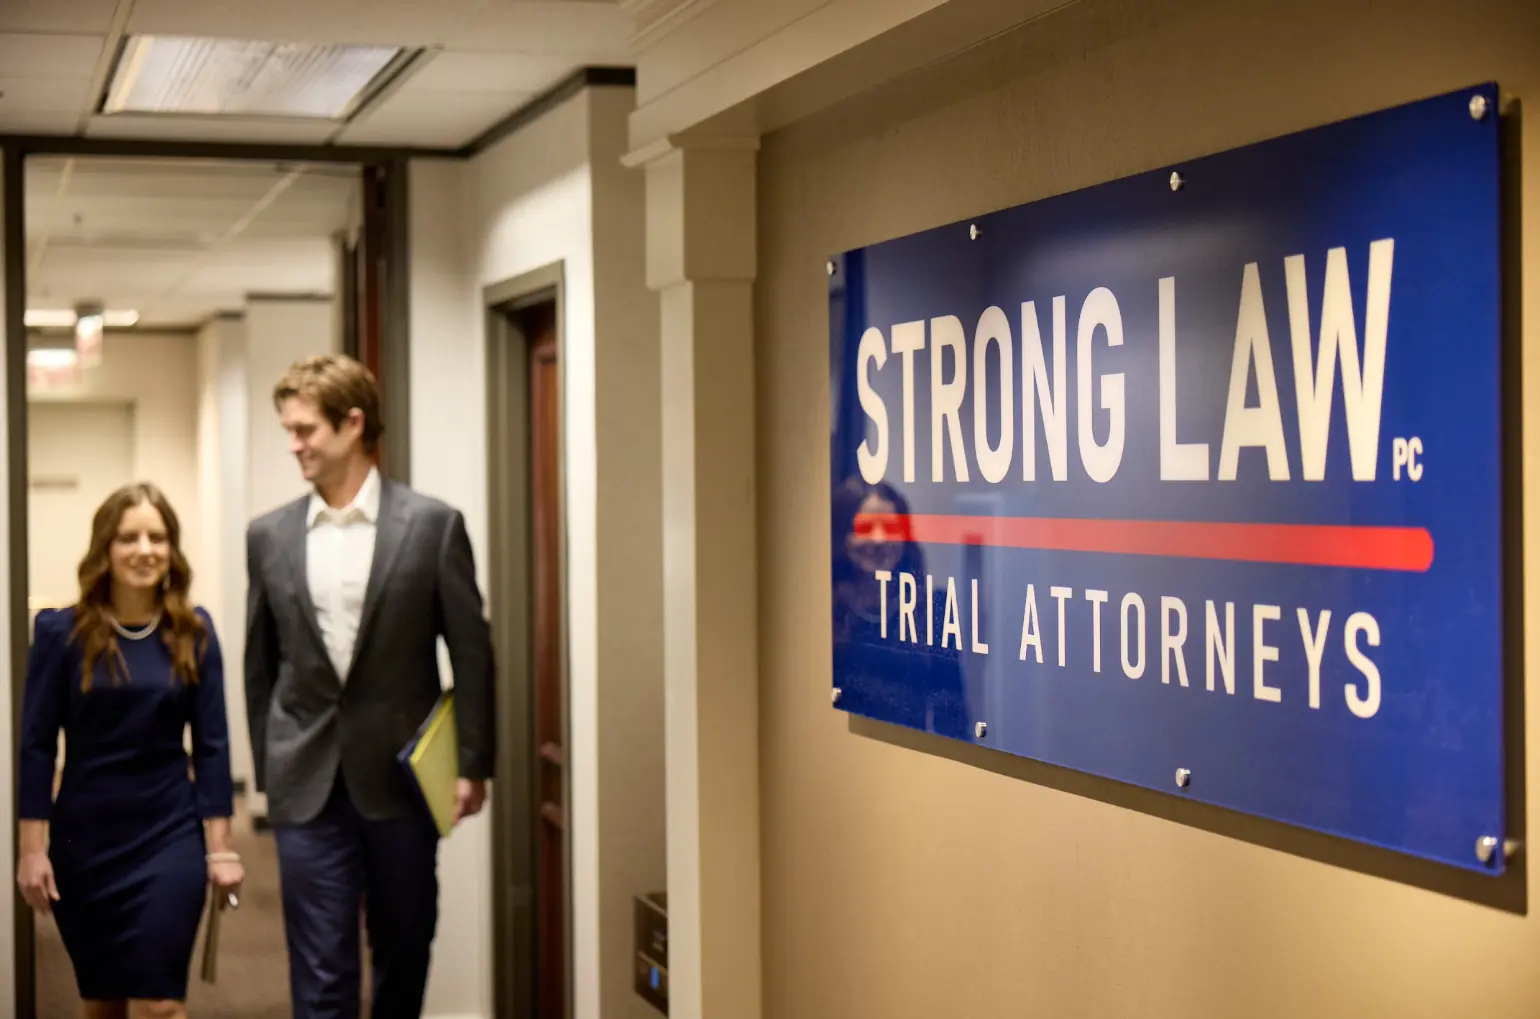 A man and a woman, both attorneys, walk by a 'STRONG LAW - TRIAL ATTORNEYS' sign in an office corridor, engaged in a discussion.